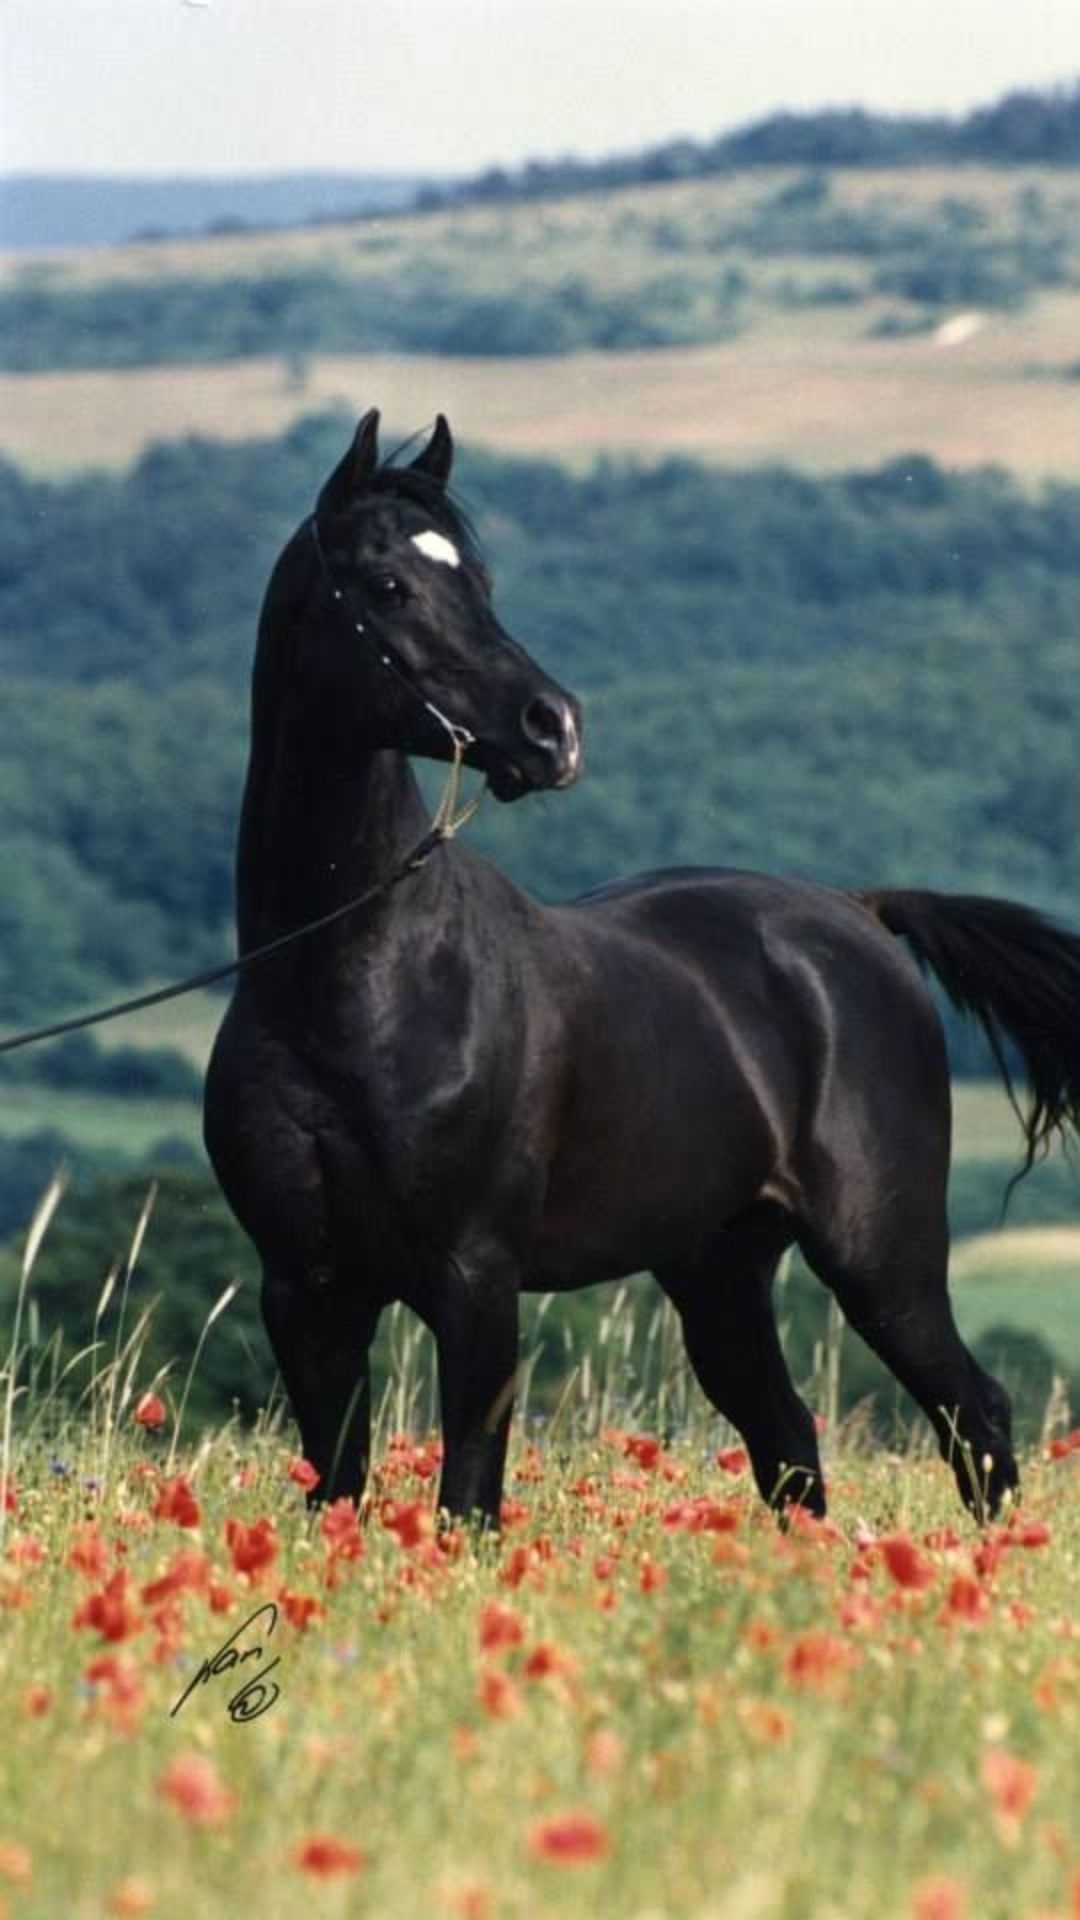 Horse: A breed that originated on the Arabian Peninsula, A distinctive head shape and high tail carriage. 1080x1920 Full HD Wallpaper.